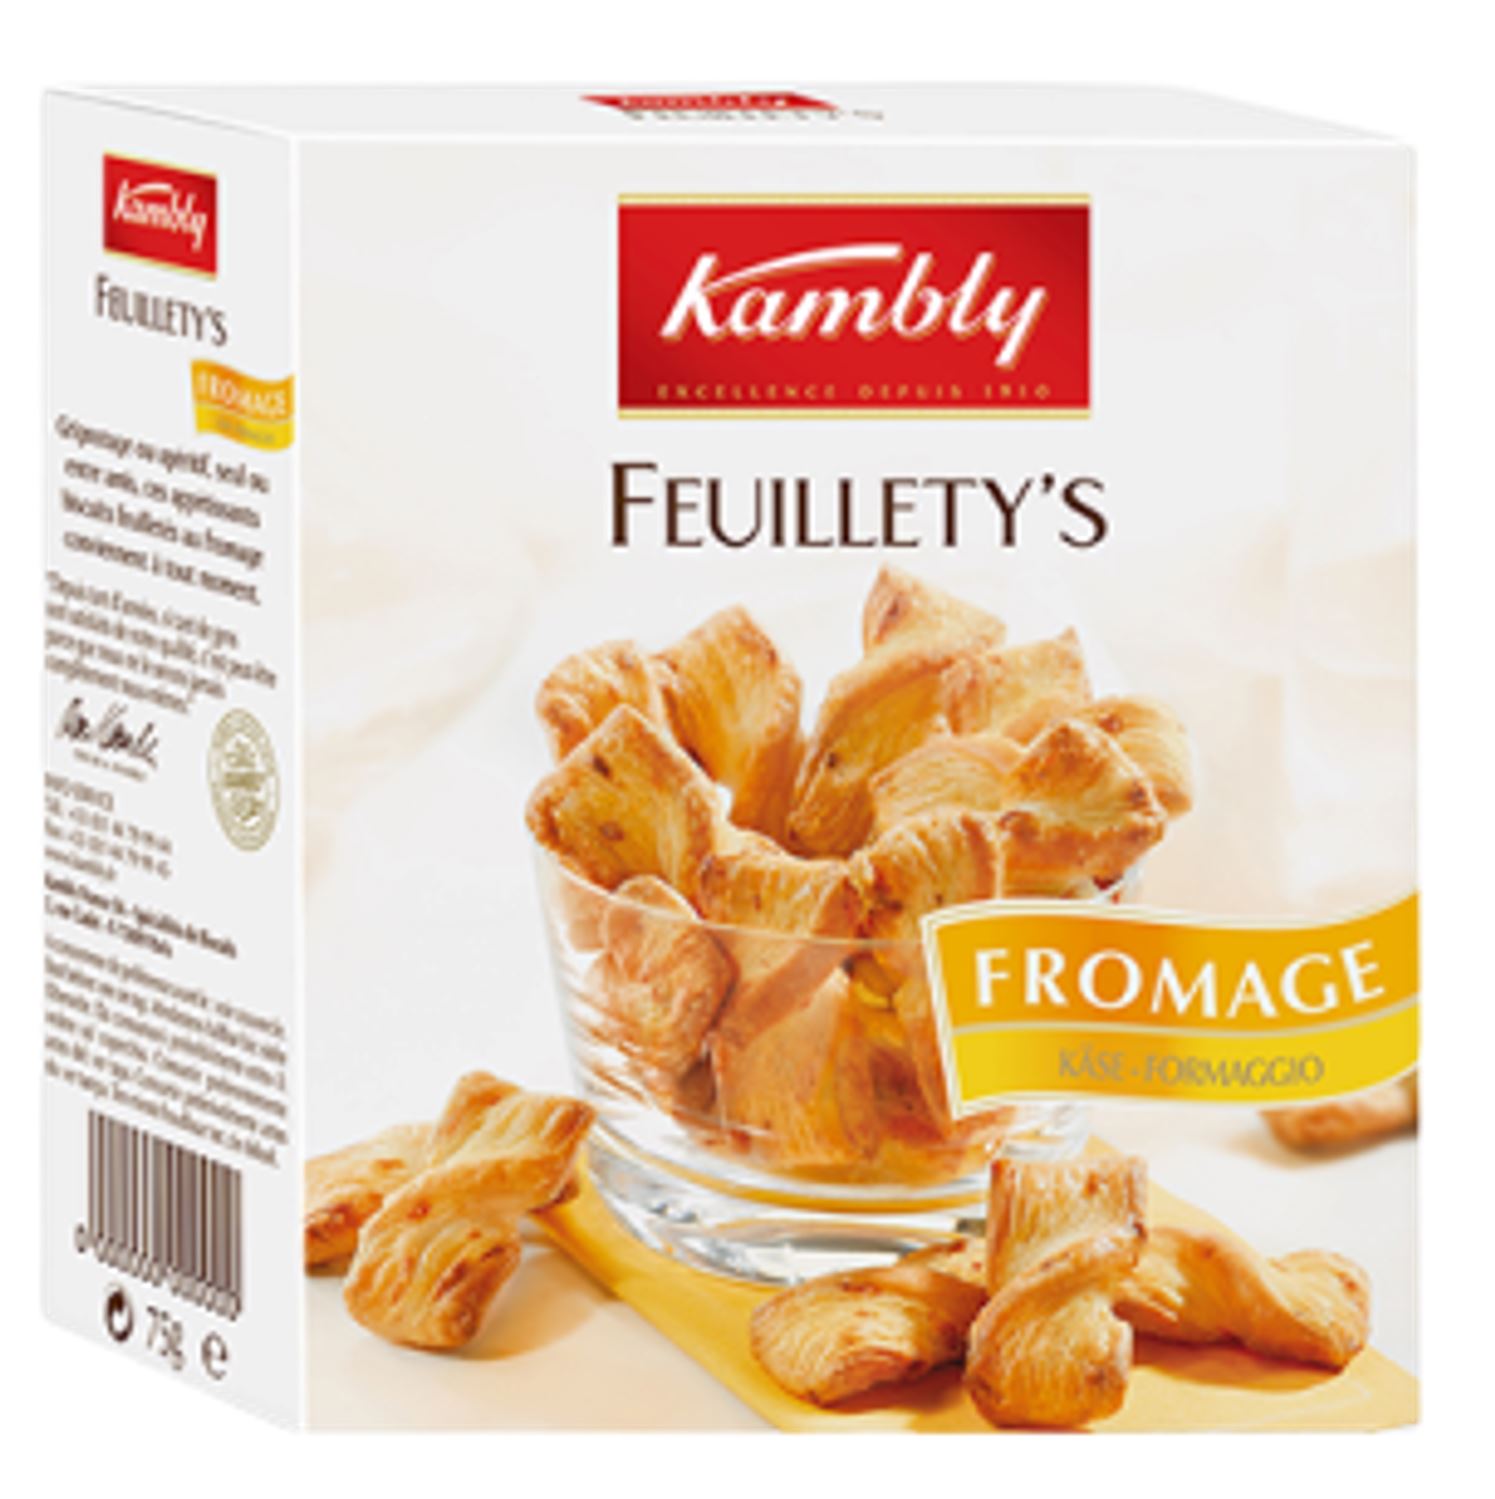 Feuillety's au fromage